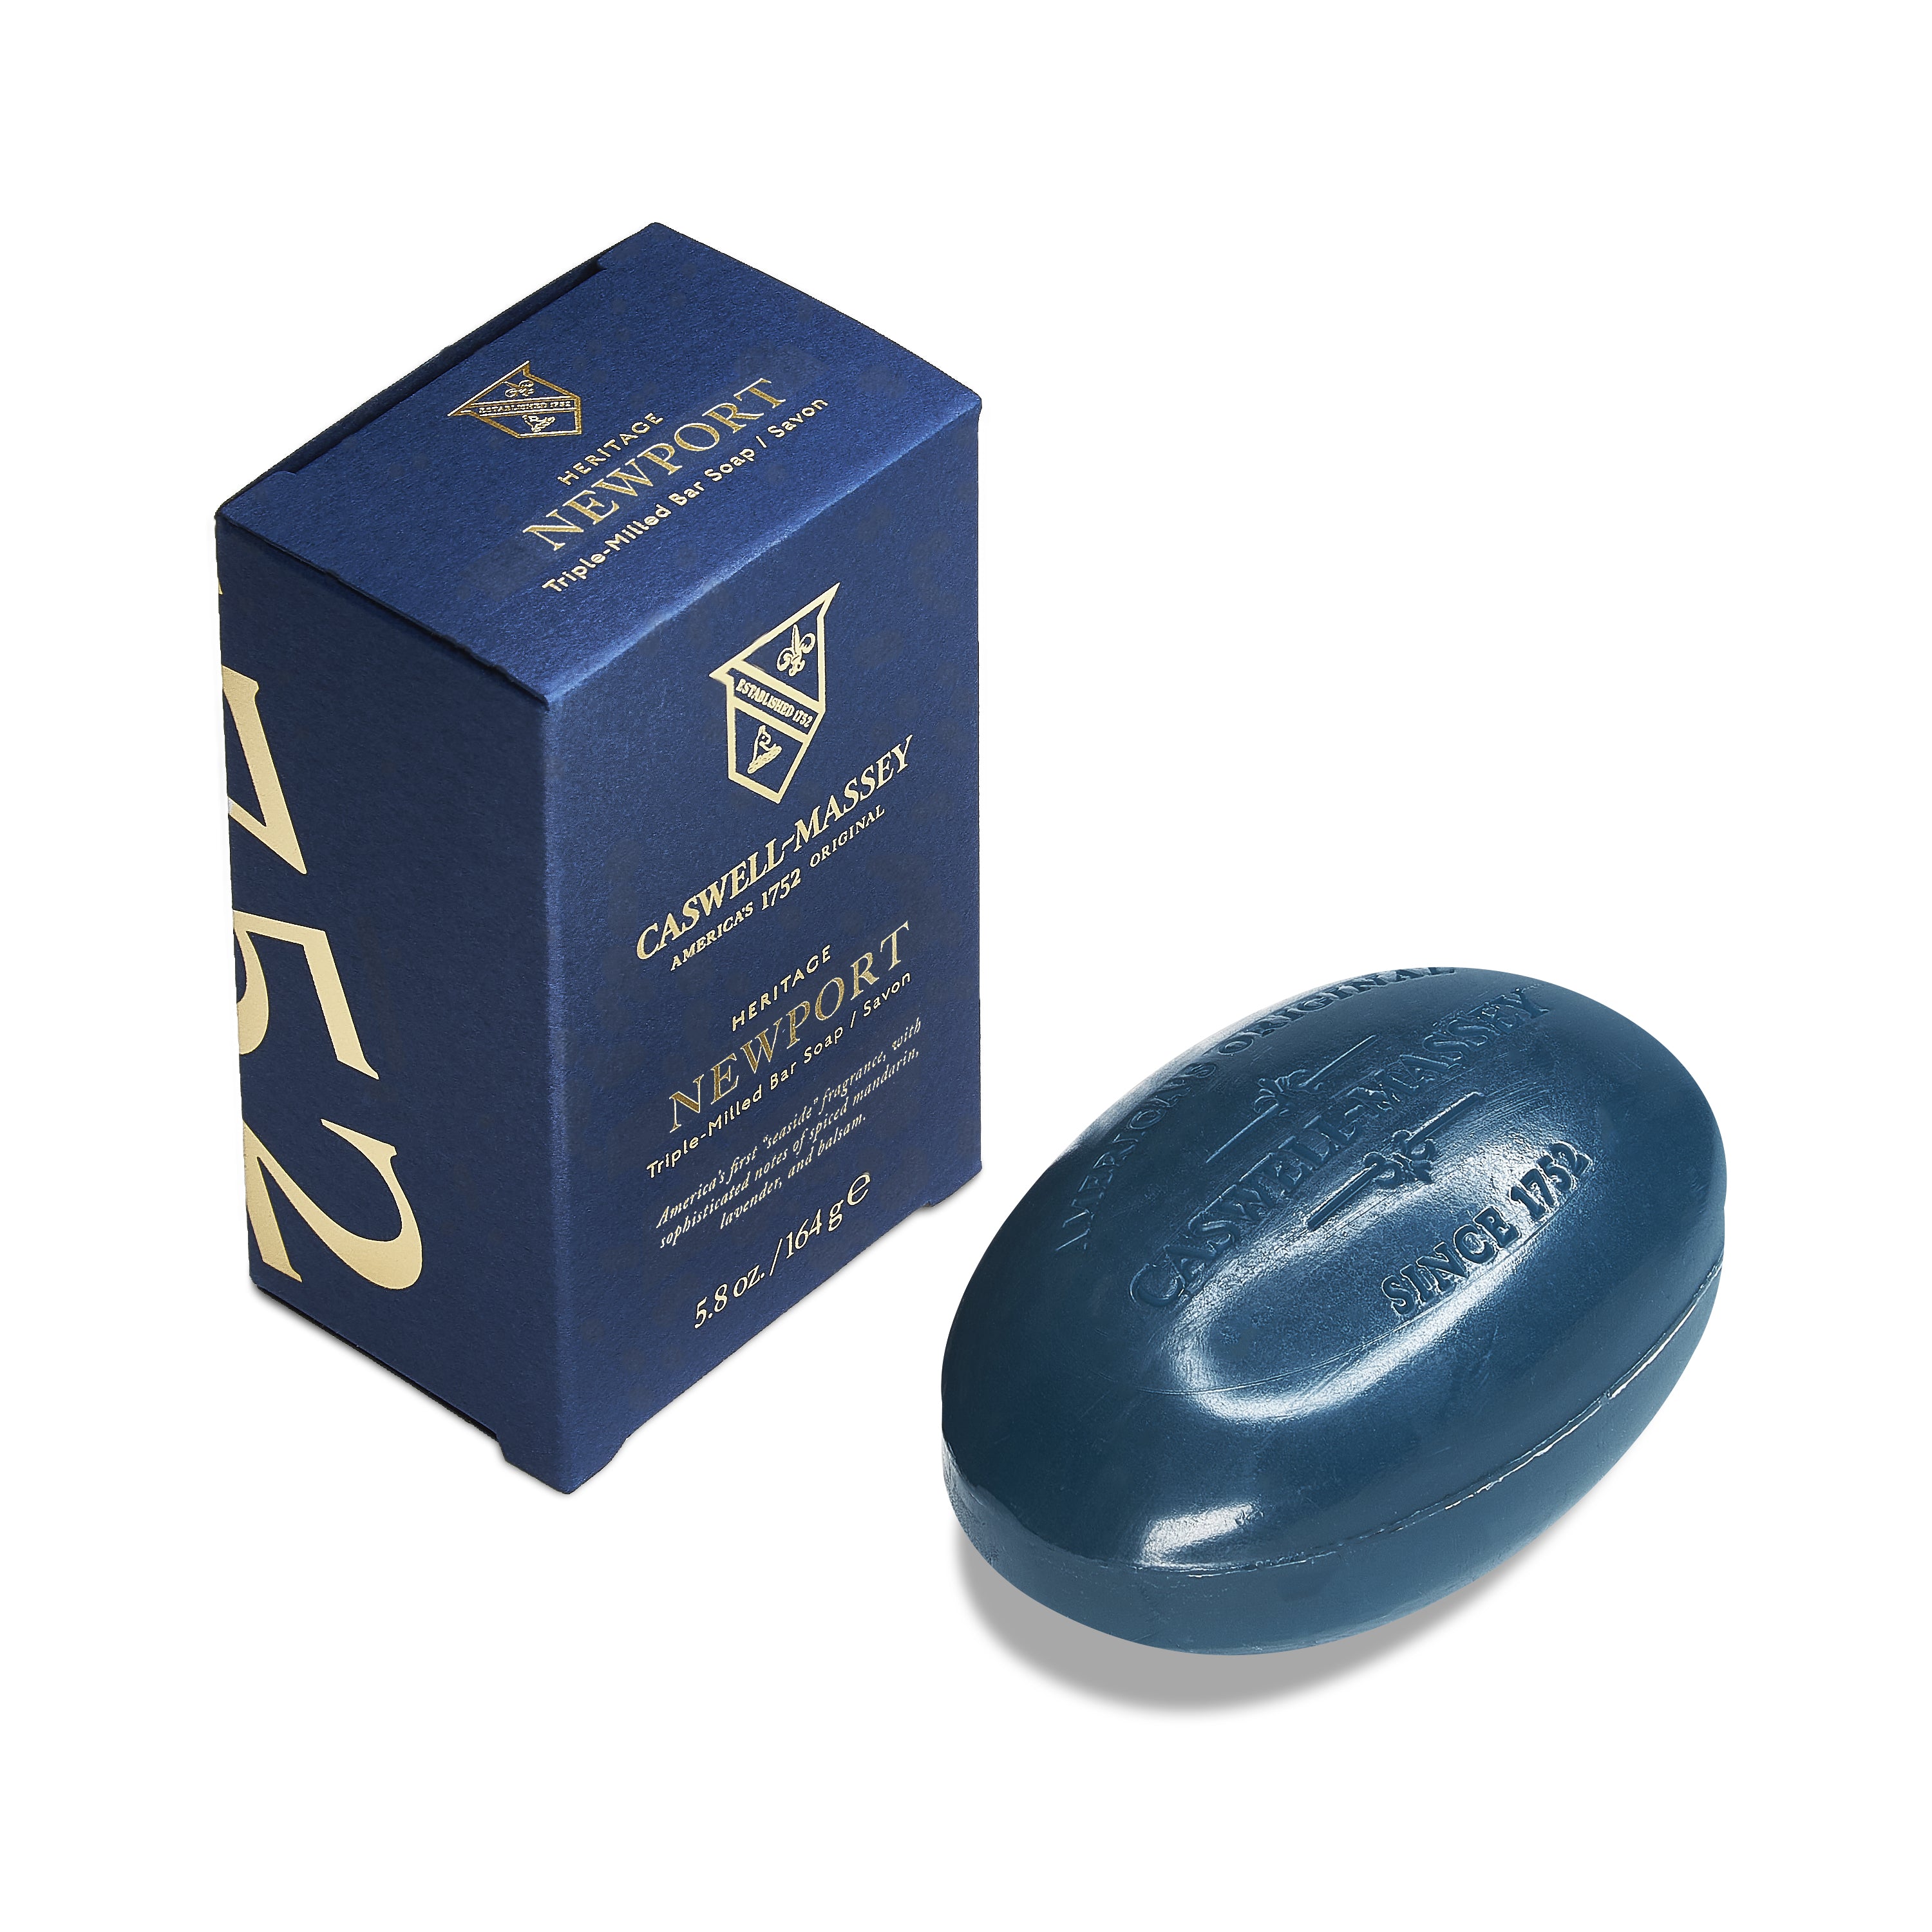 Caswell-Massey® Heritage Newport Bar Soap shown next to navy blue box